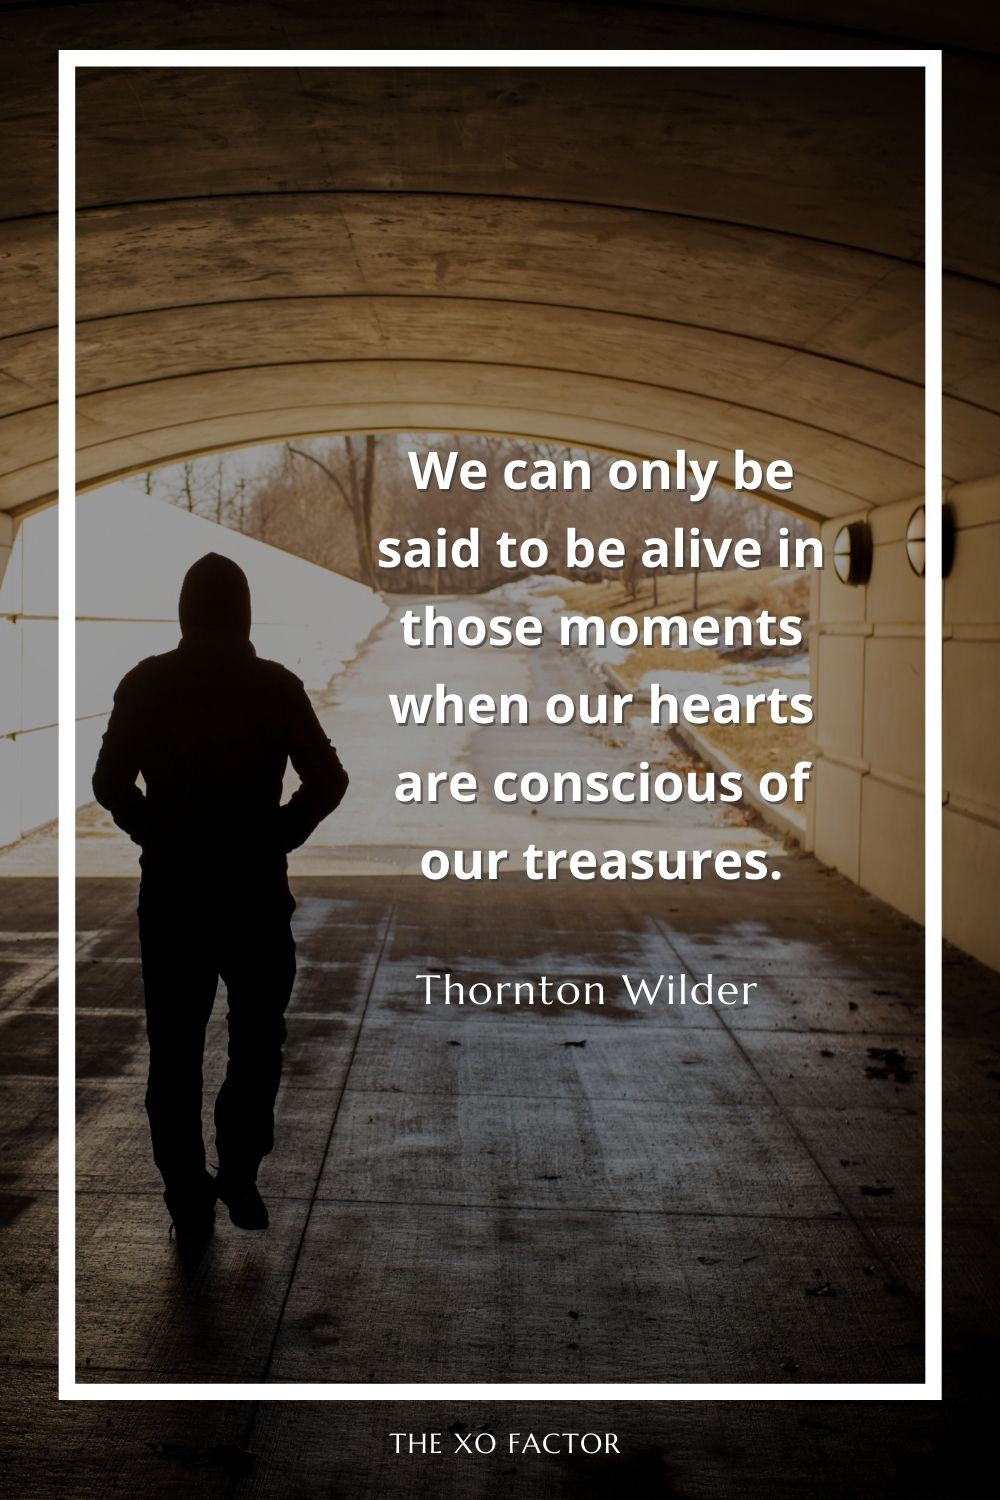 We can only be said to be alive in those moments when our hearts are conscious of our treasures.